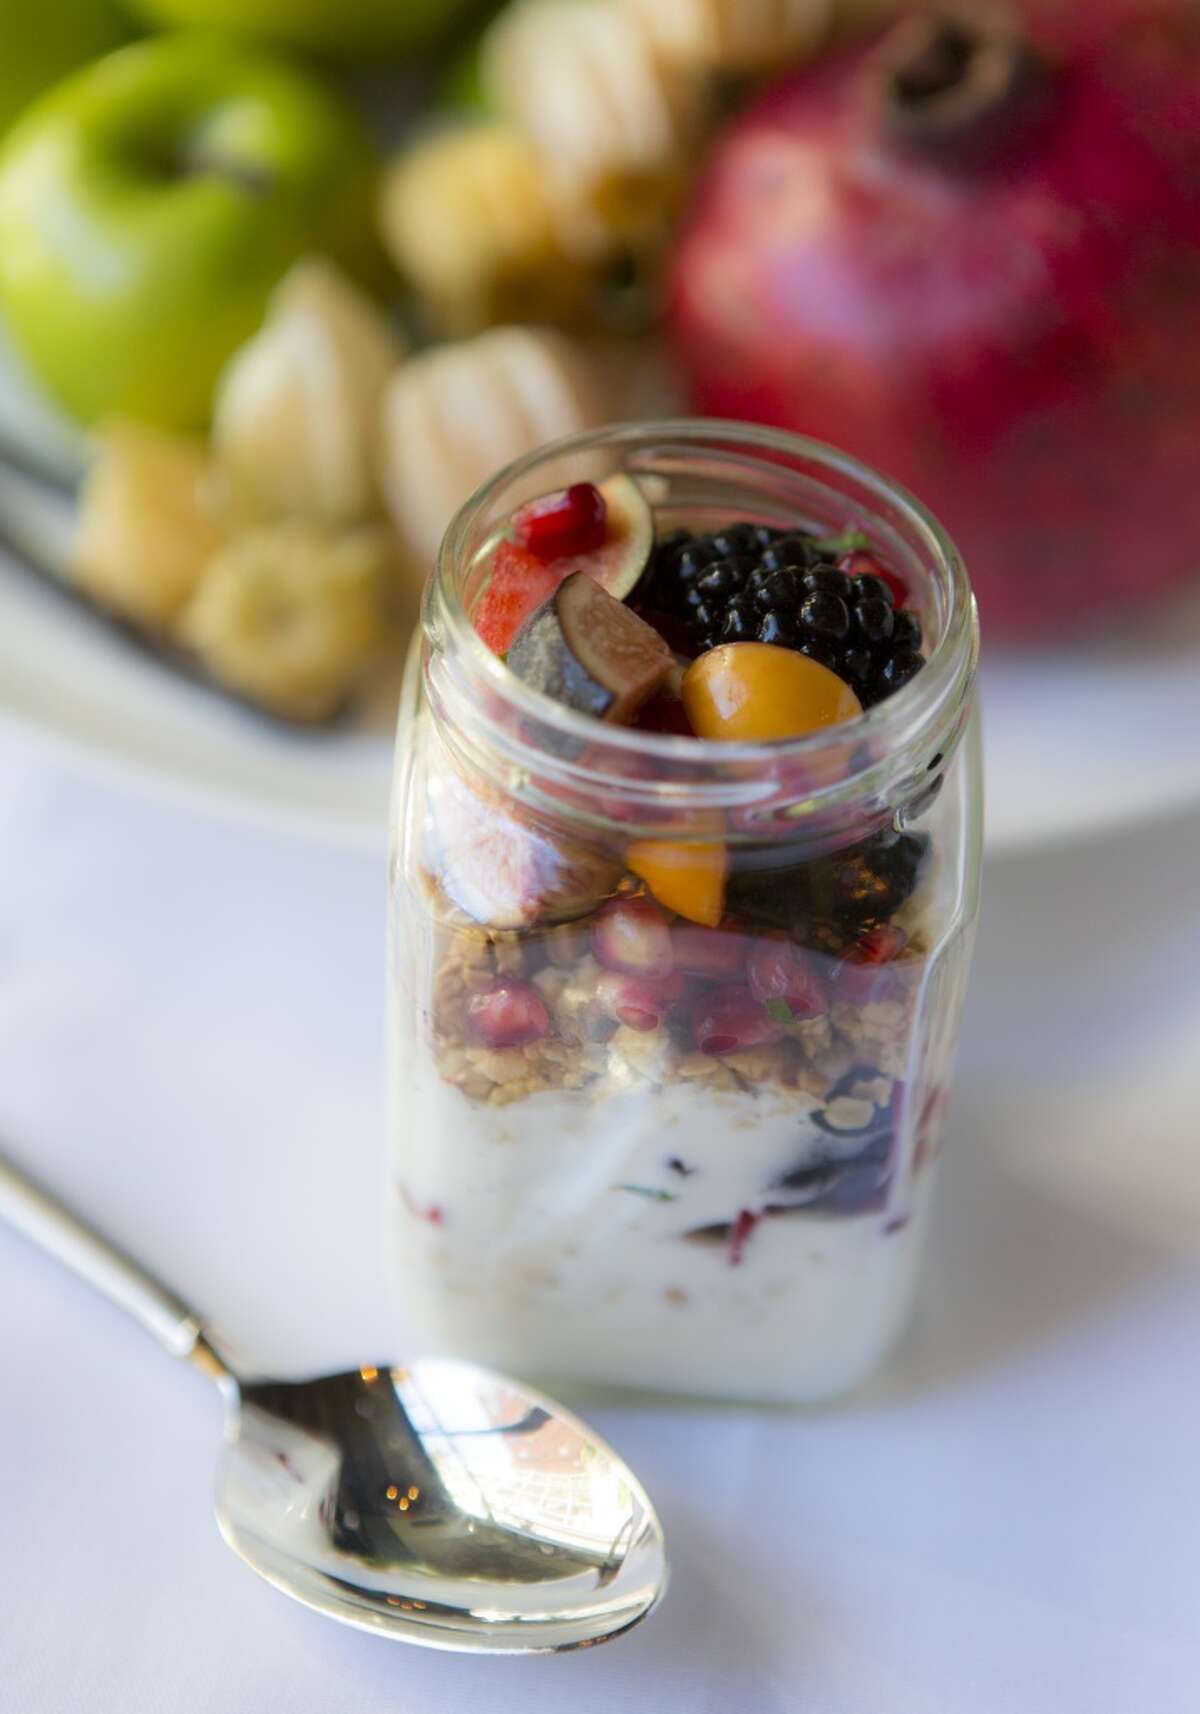 The yogurt parfait from Cured.